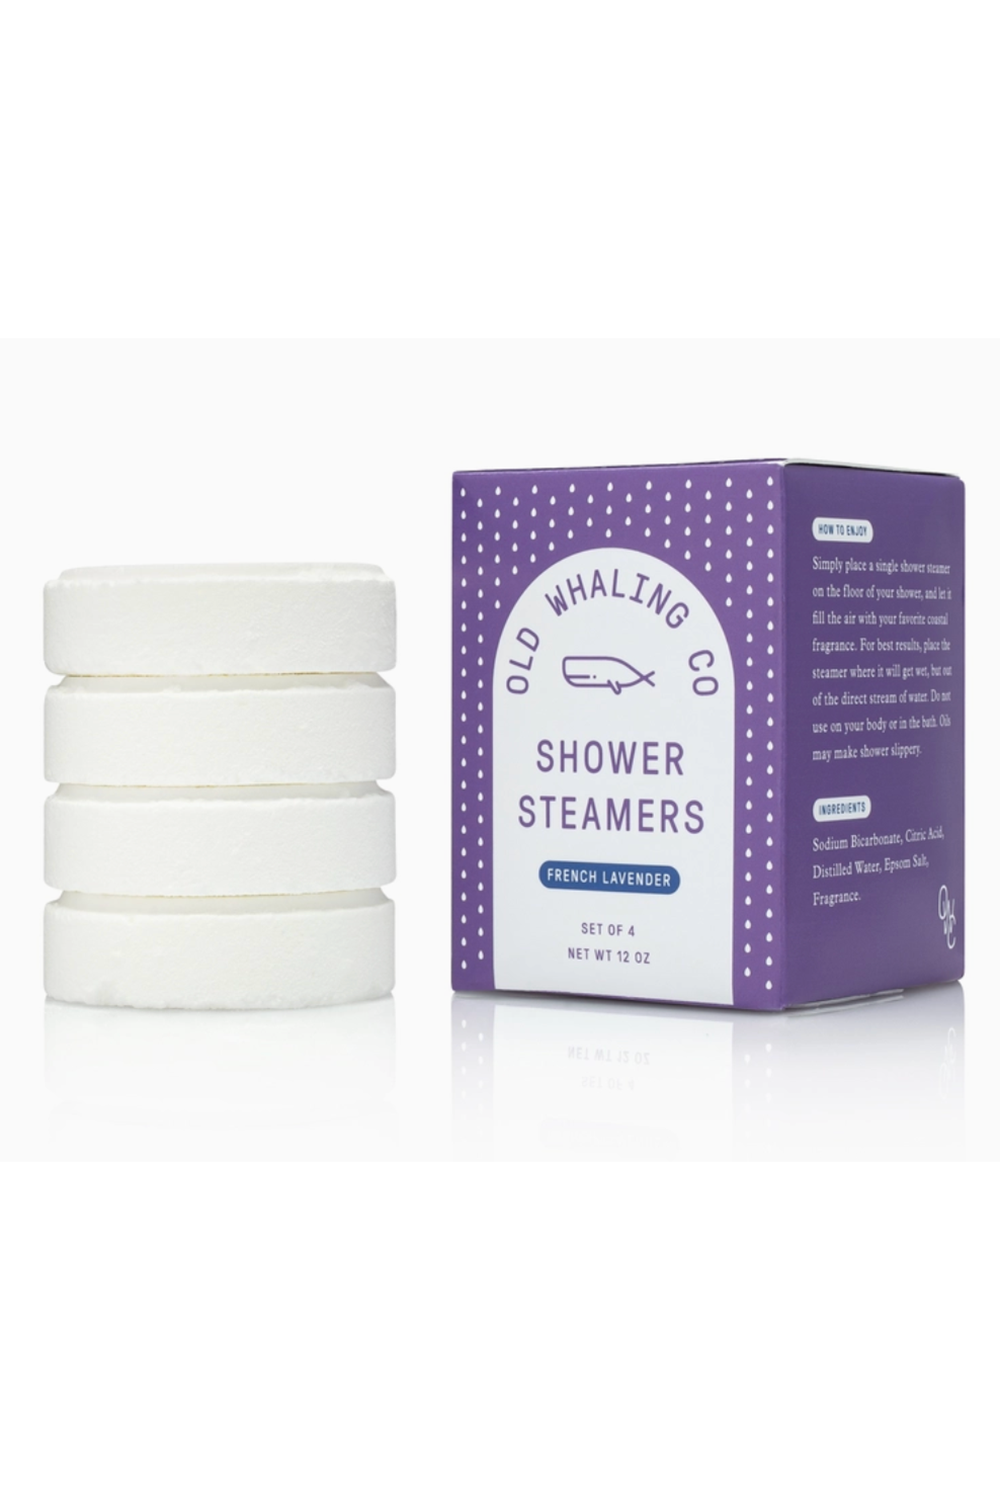 Whaling Shower Steamers - French Lavender